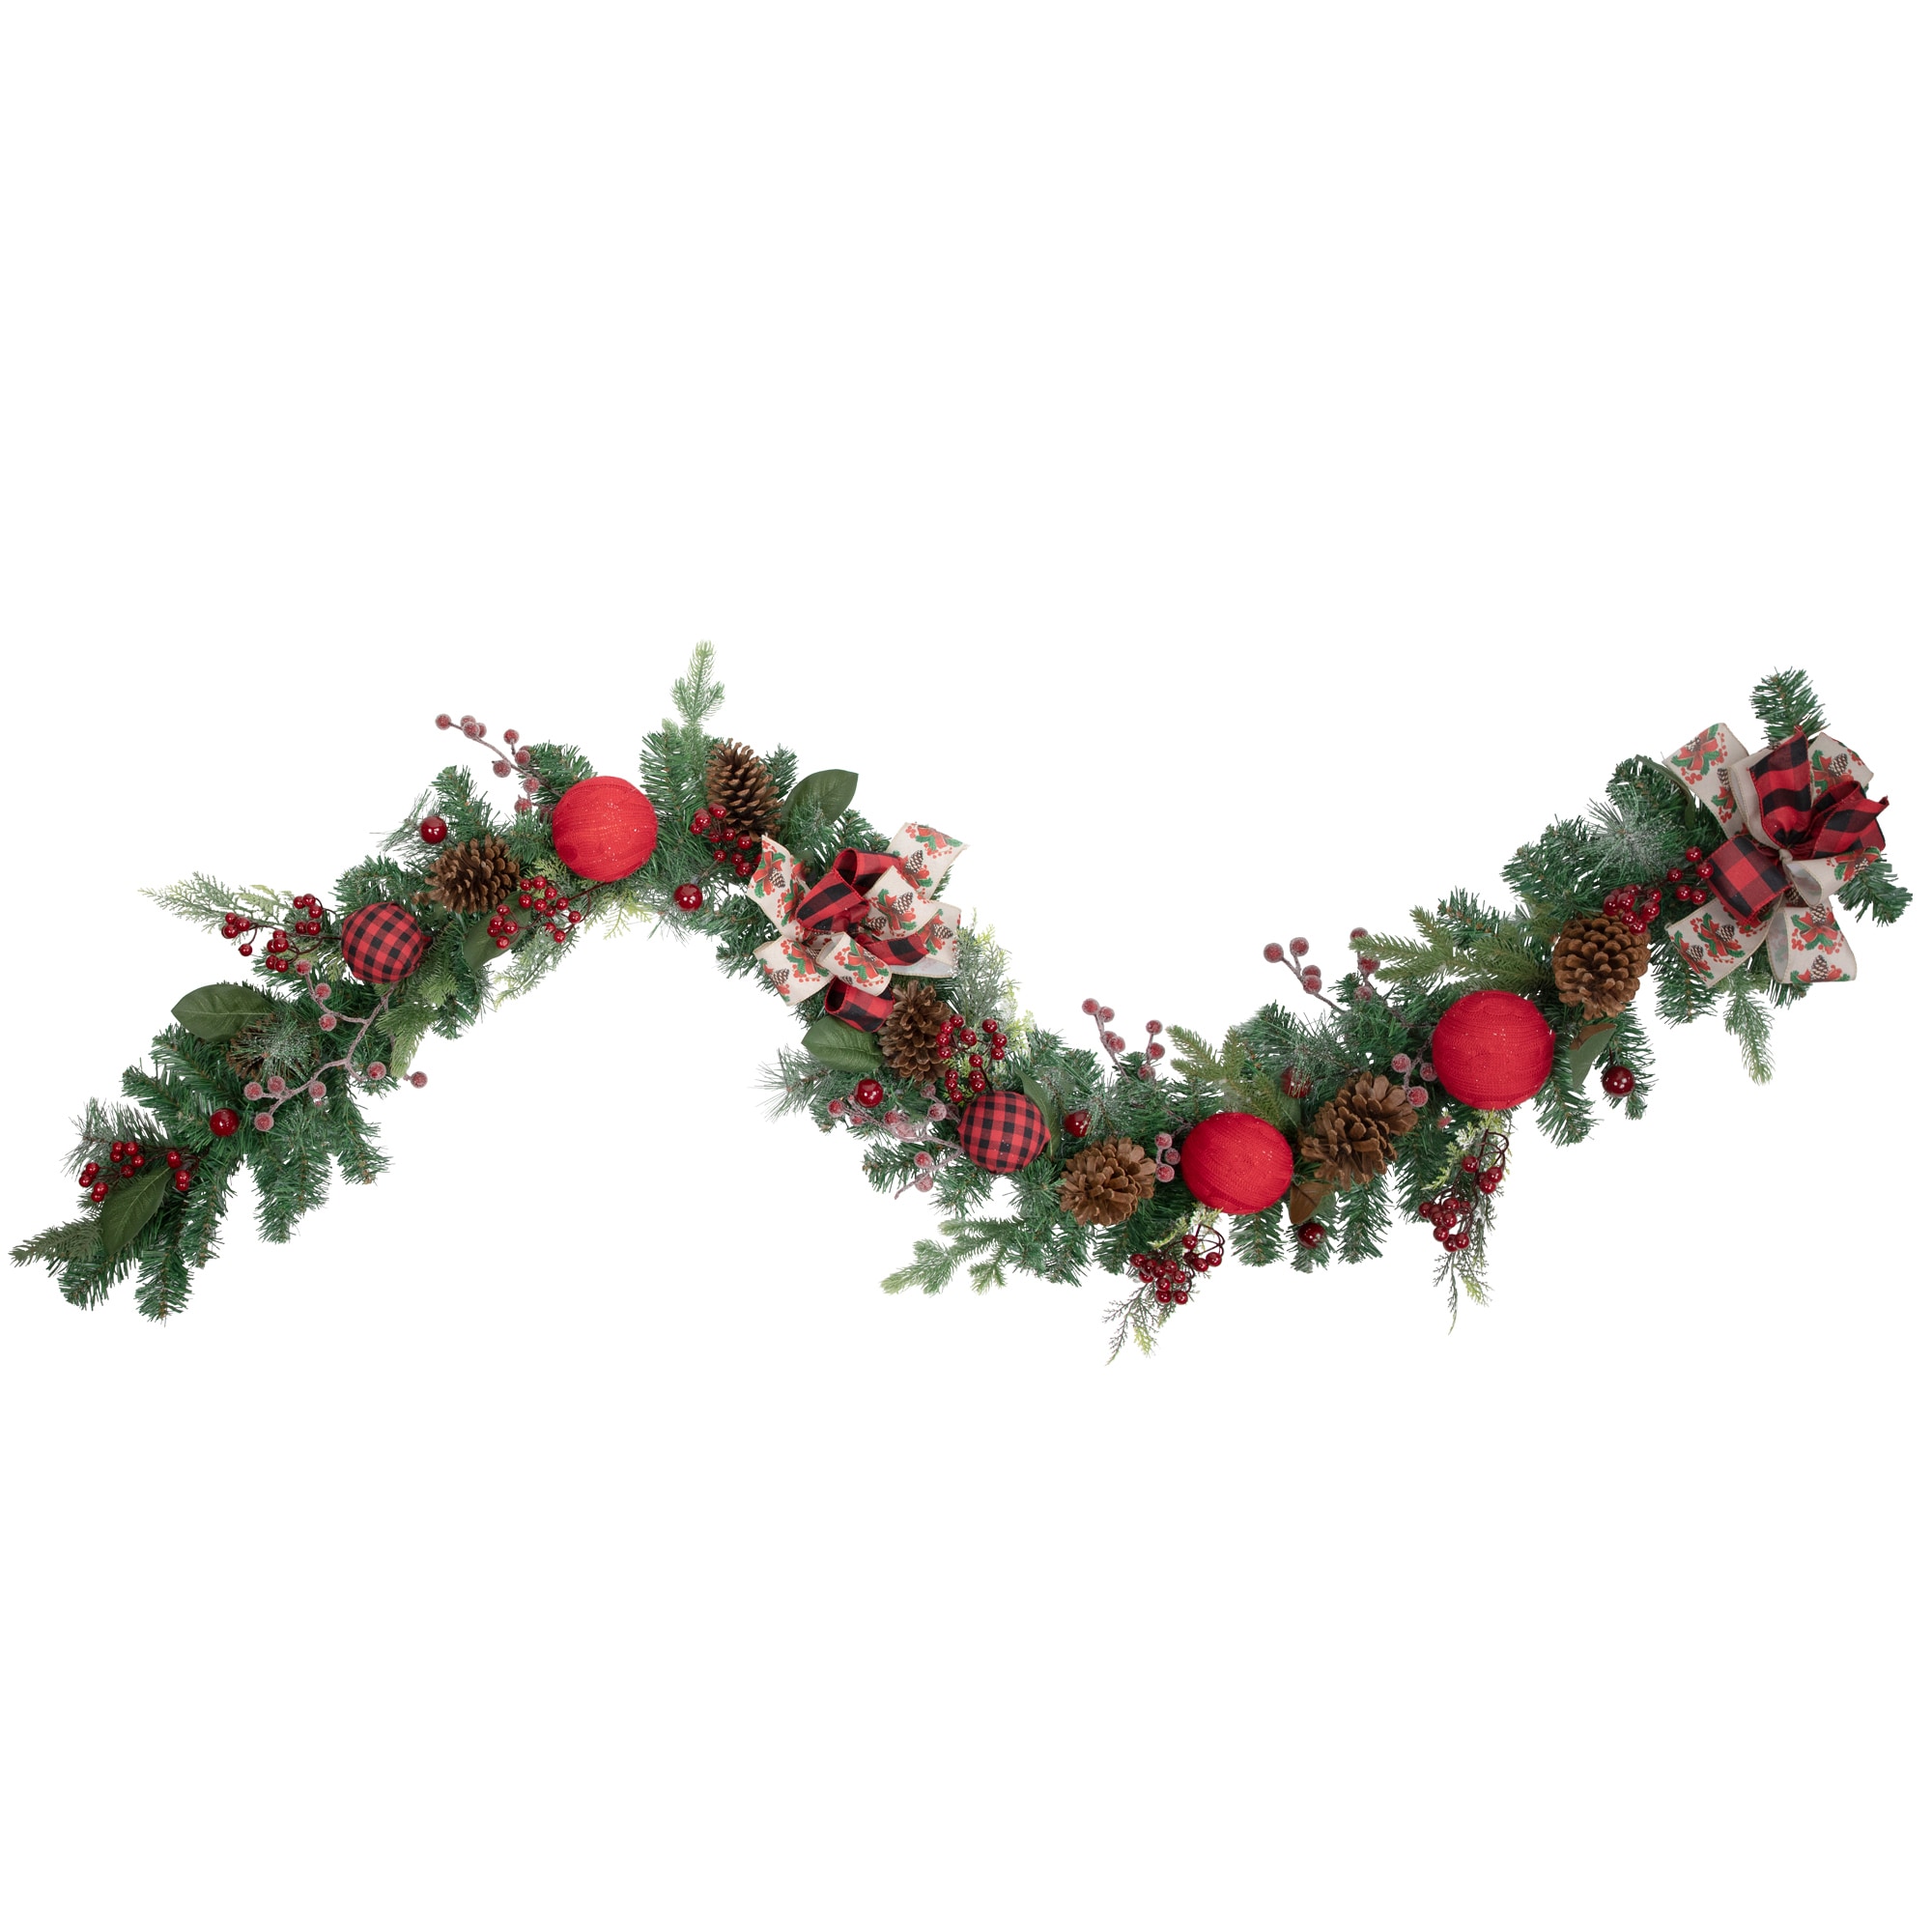 Northlight 6' x 10 inch Pre-Lit Decorated Black Pine Artificial Christmas Garland, Cool White LED Lights